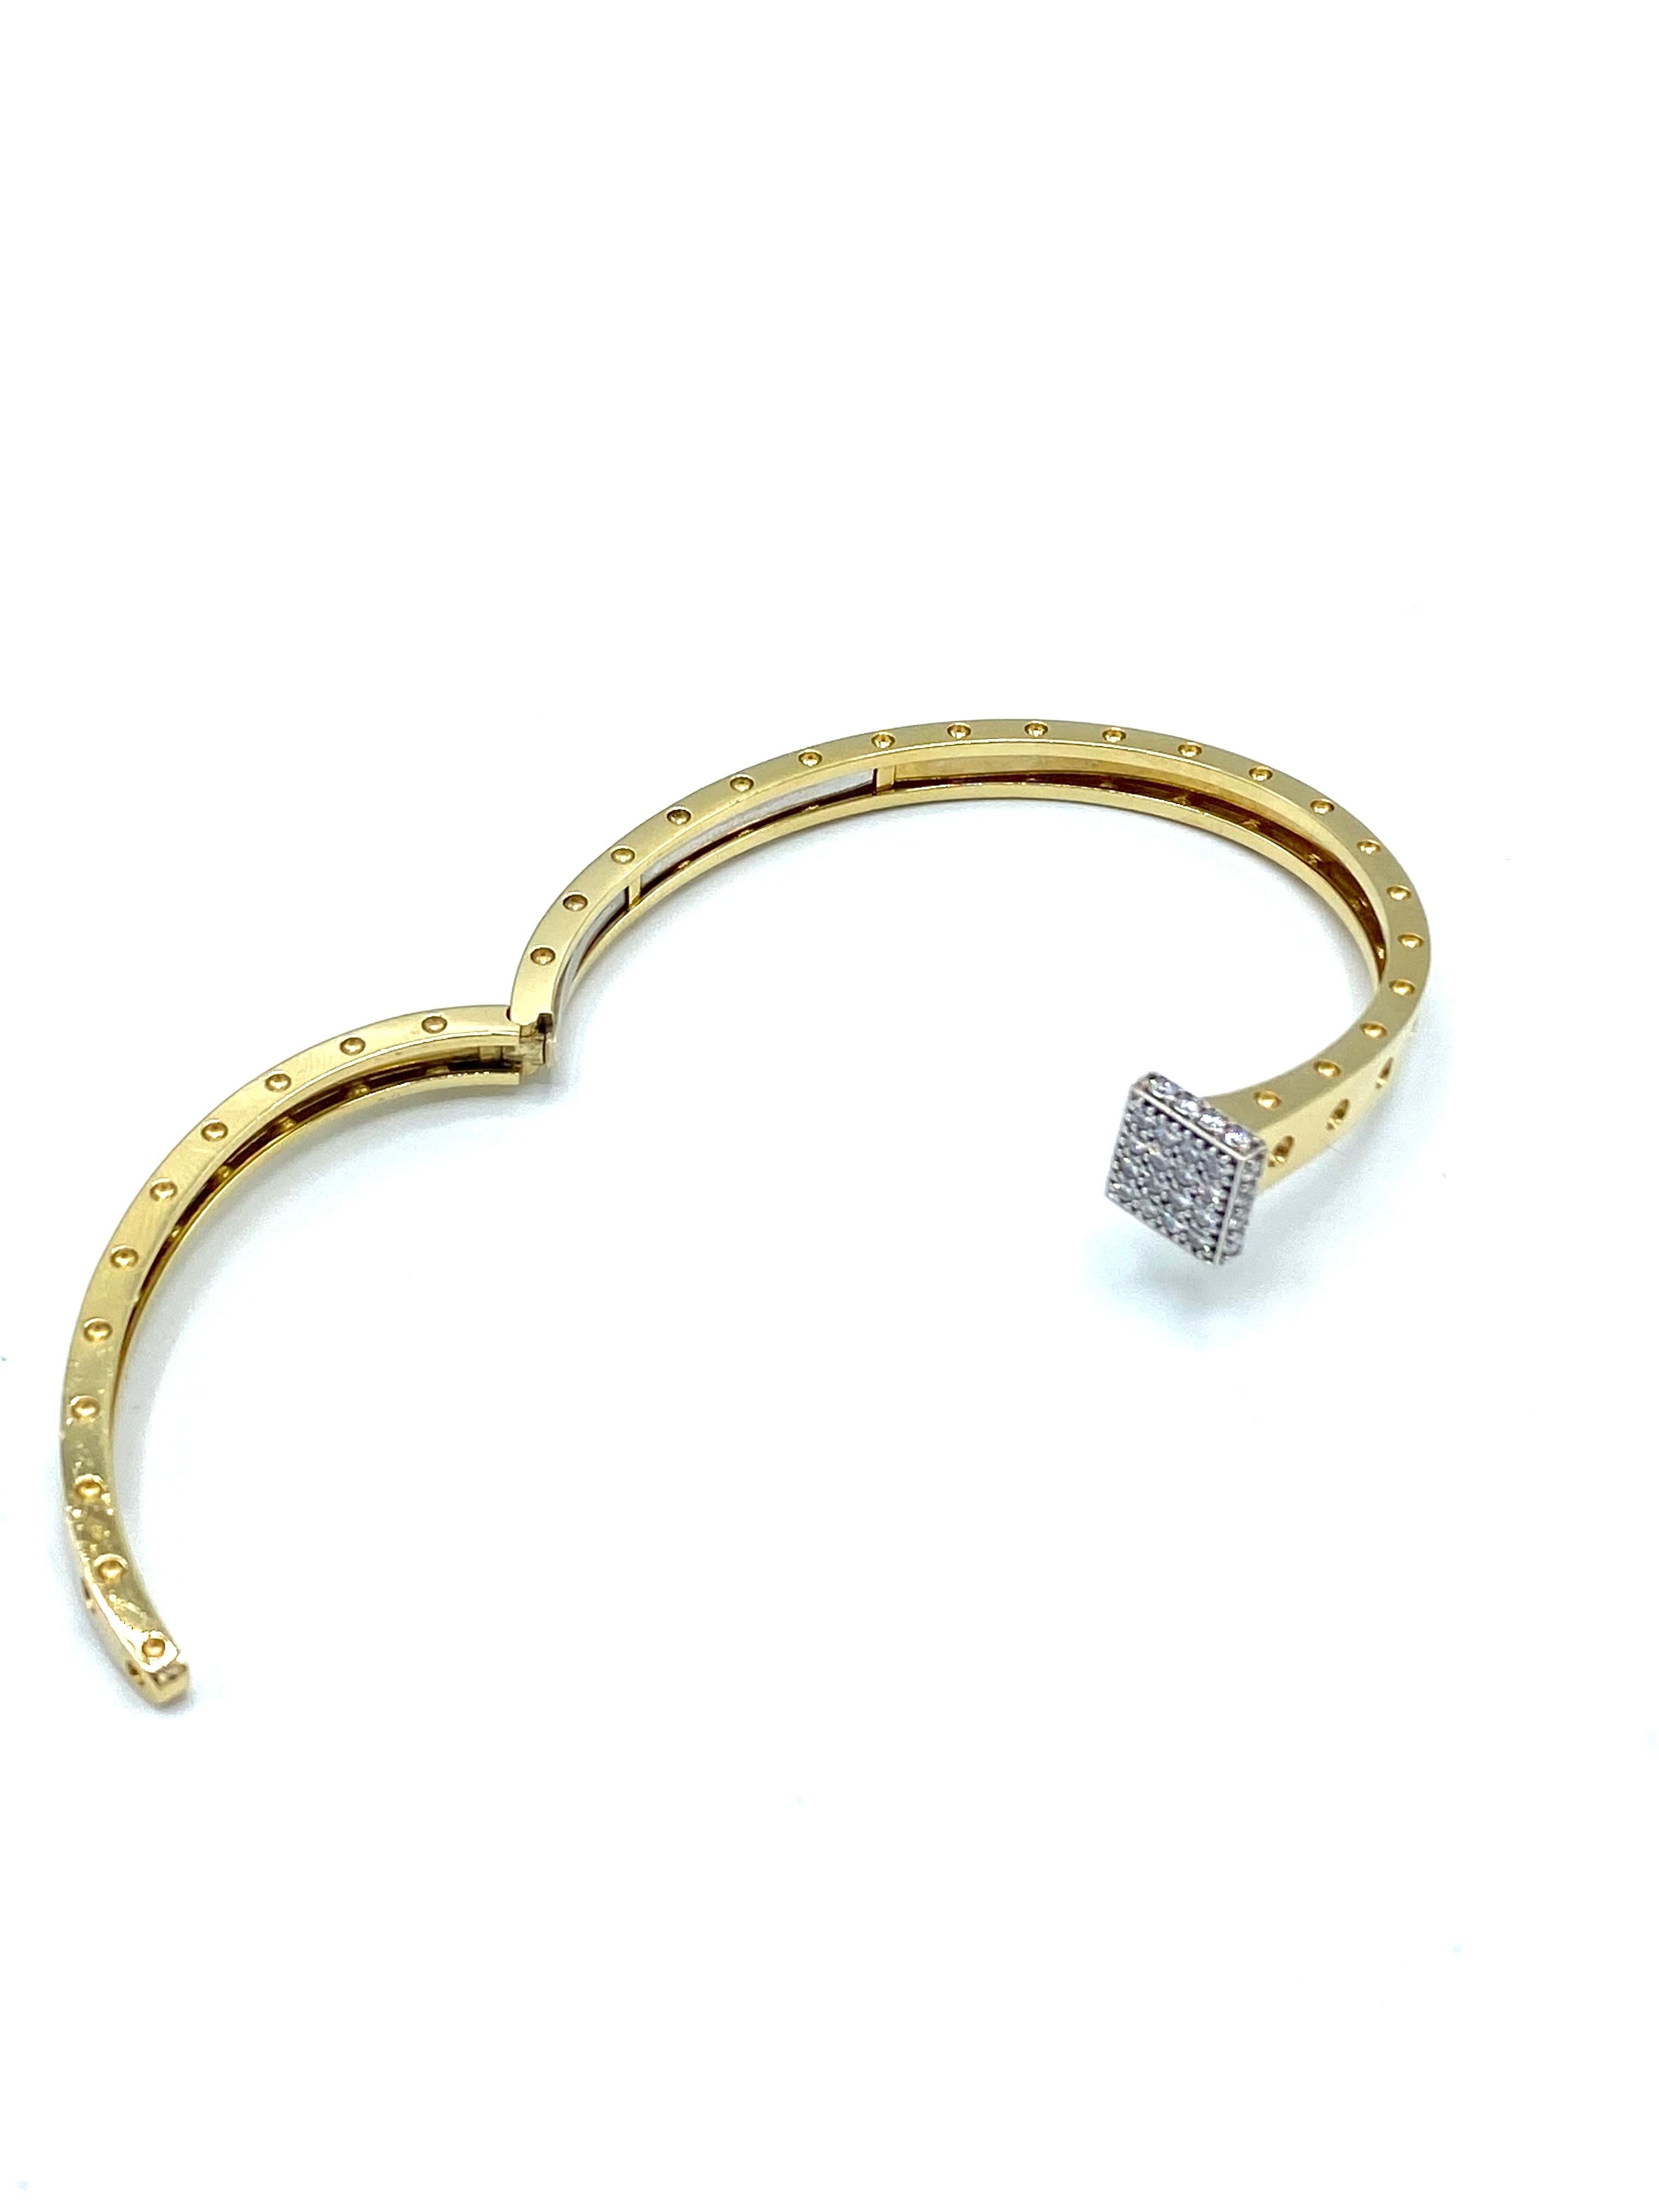 1980's Roberto Coin Yellow Gold and Diamond Nail Bangle Bracelet For Sale 1